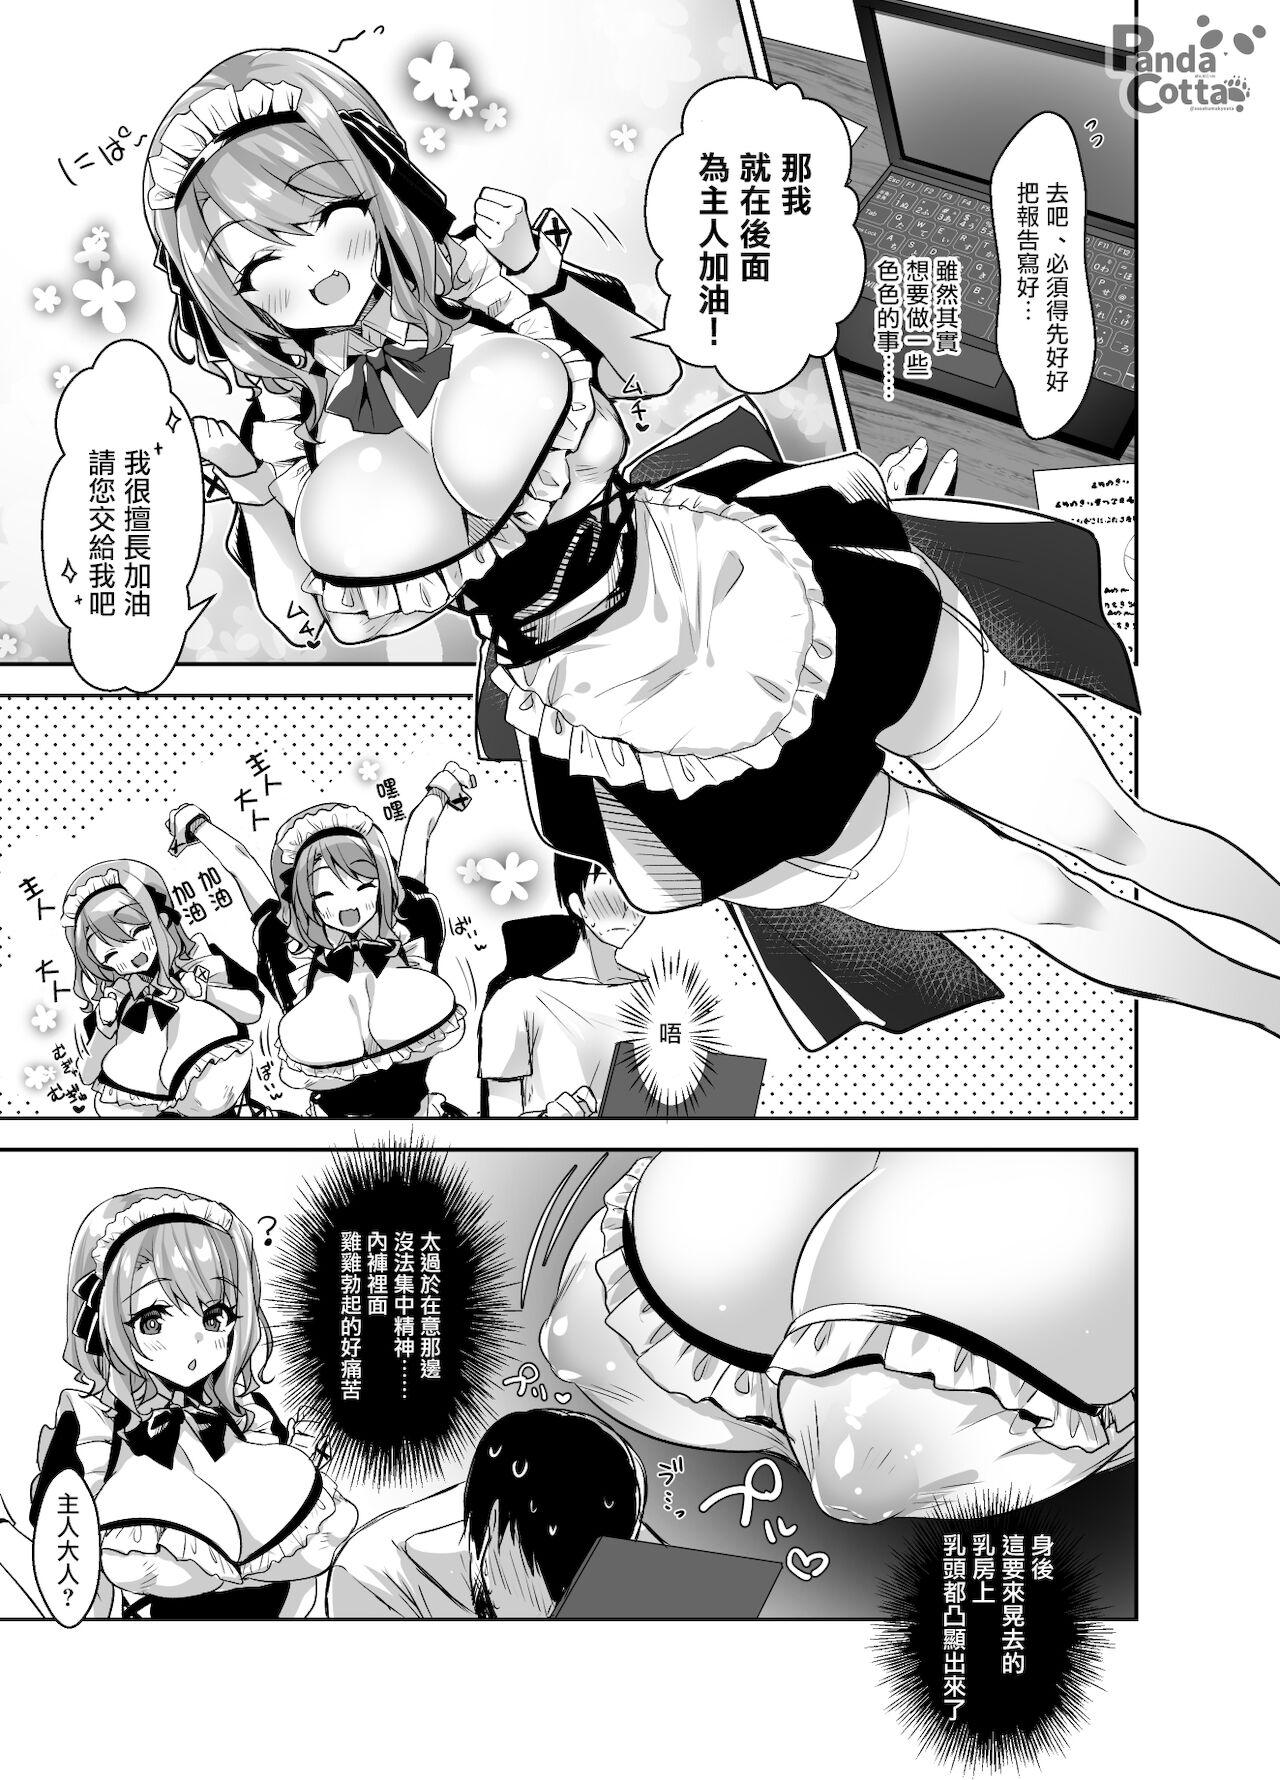 Fetiche Oppai Maid Delivery - Original Hot Naked Girl - Page 9